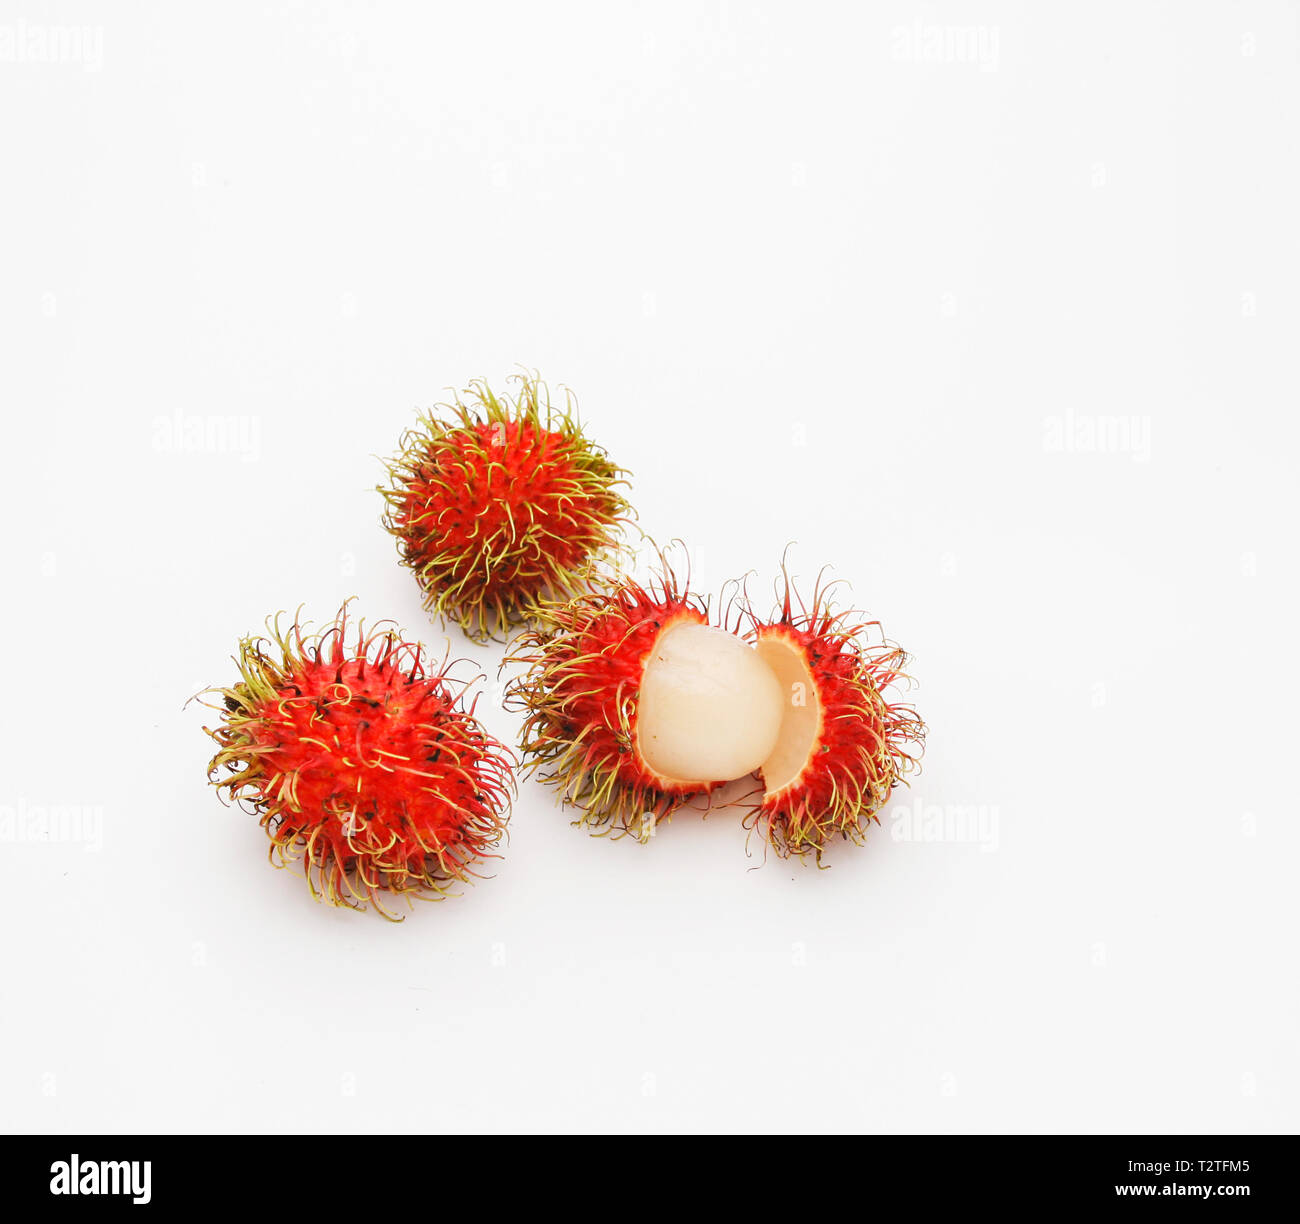 Three rambutans, one open. Delicious asian sweet fruit tasting a bit like lychee. The name rambutan is derived from the Malay word “rambut” meaning ha Stock Photo